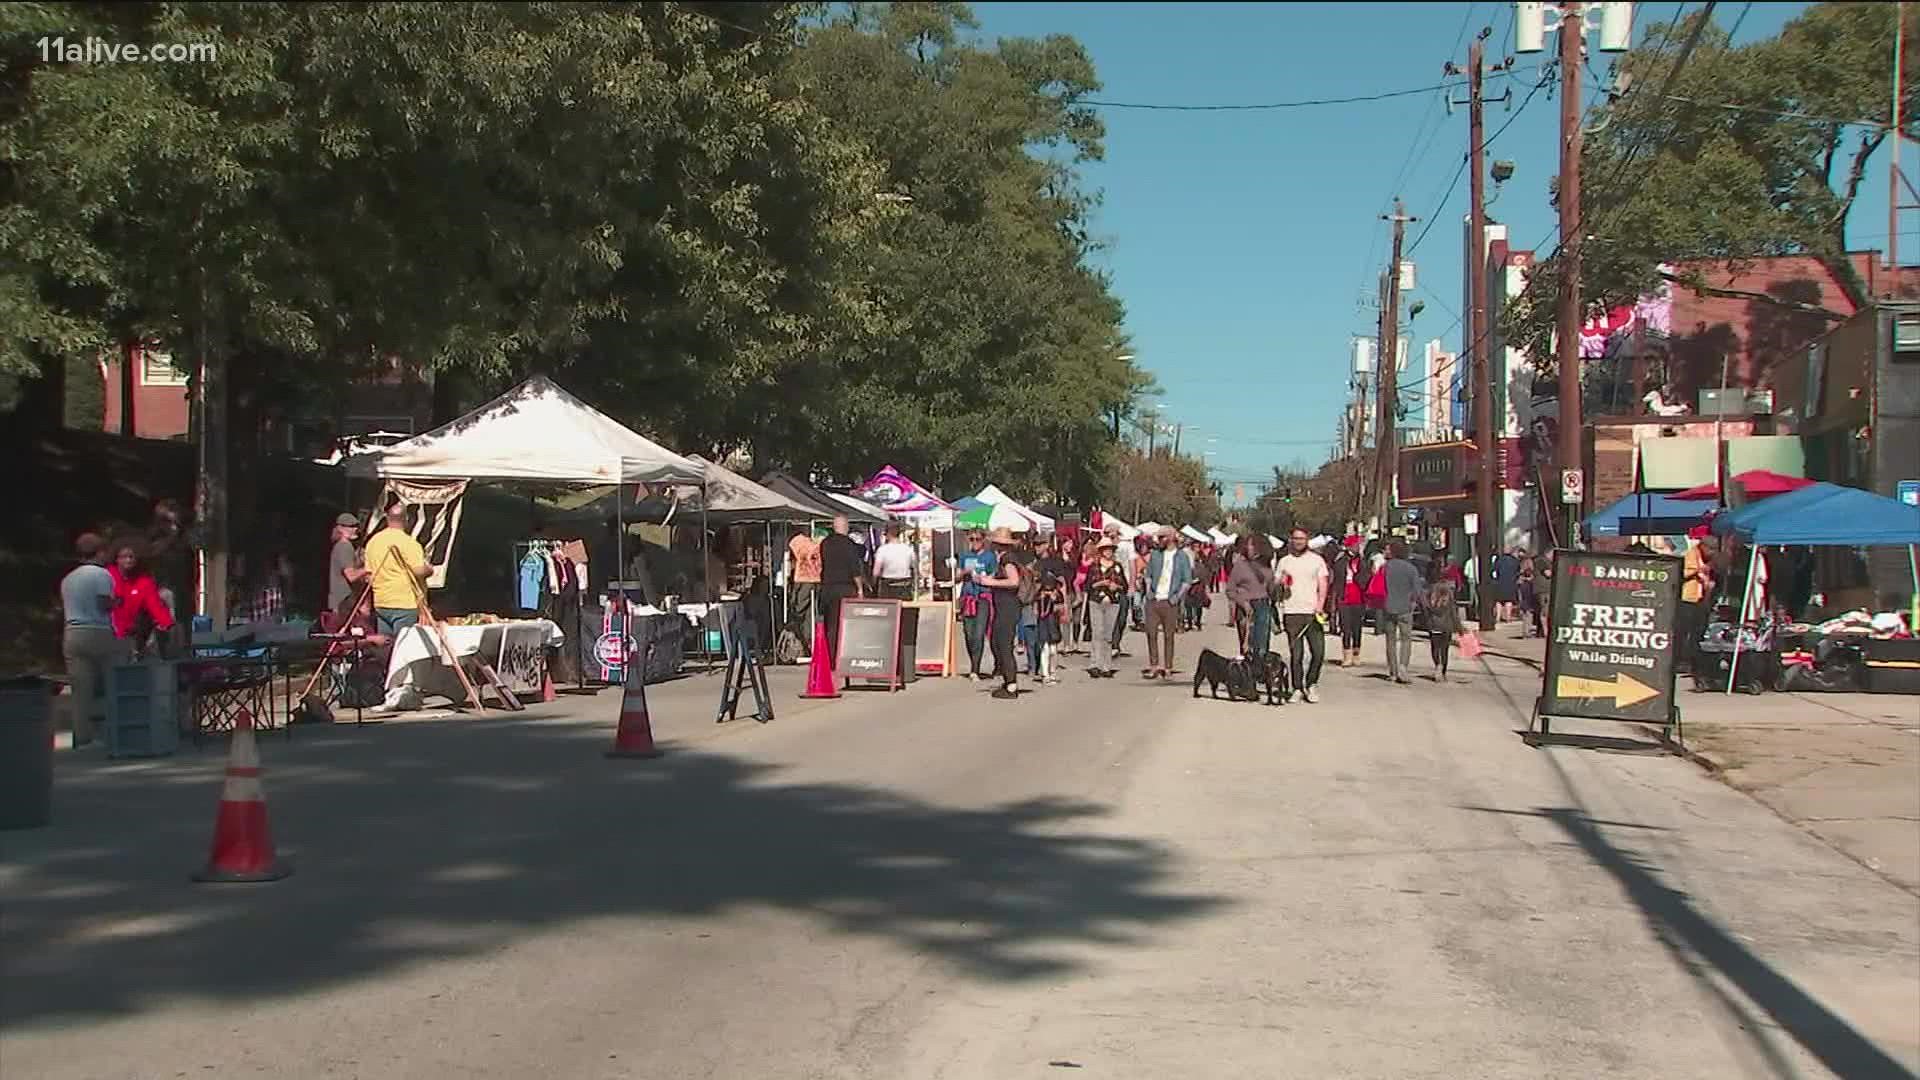 The neighborhood's annual Halloween festival has been taking place since the 1970s.